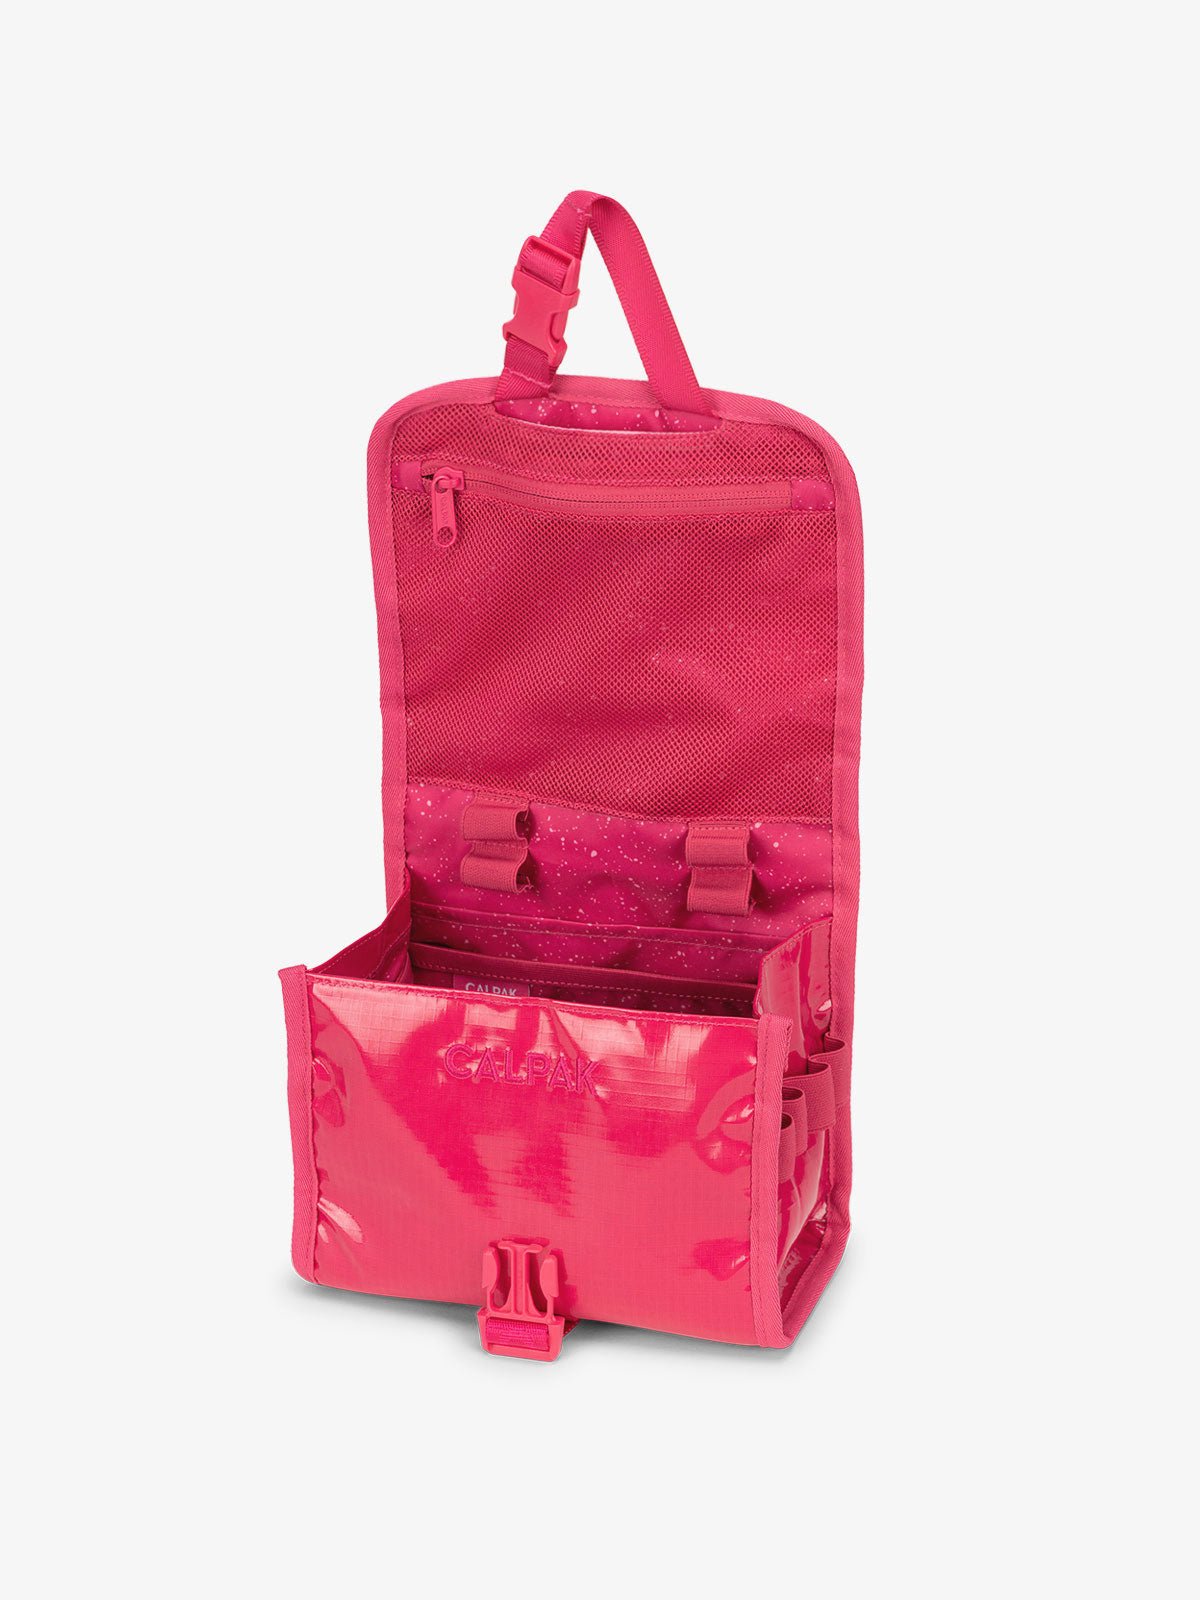 CALPAK Terra Hanging Travel Toiletry Bag for women with buckle closure, hanging hook and multiple compartments in hot pink